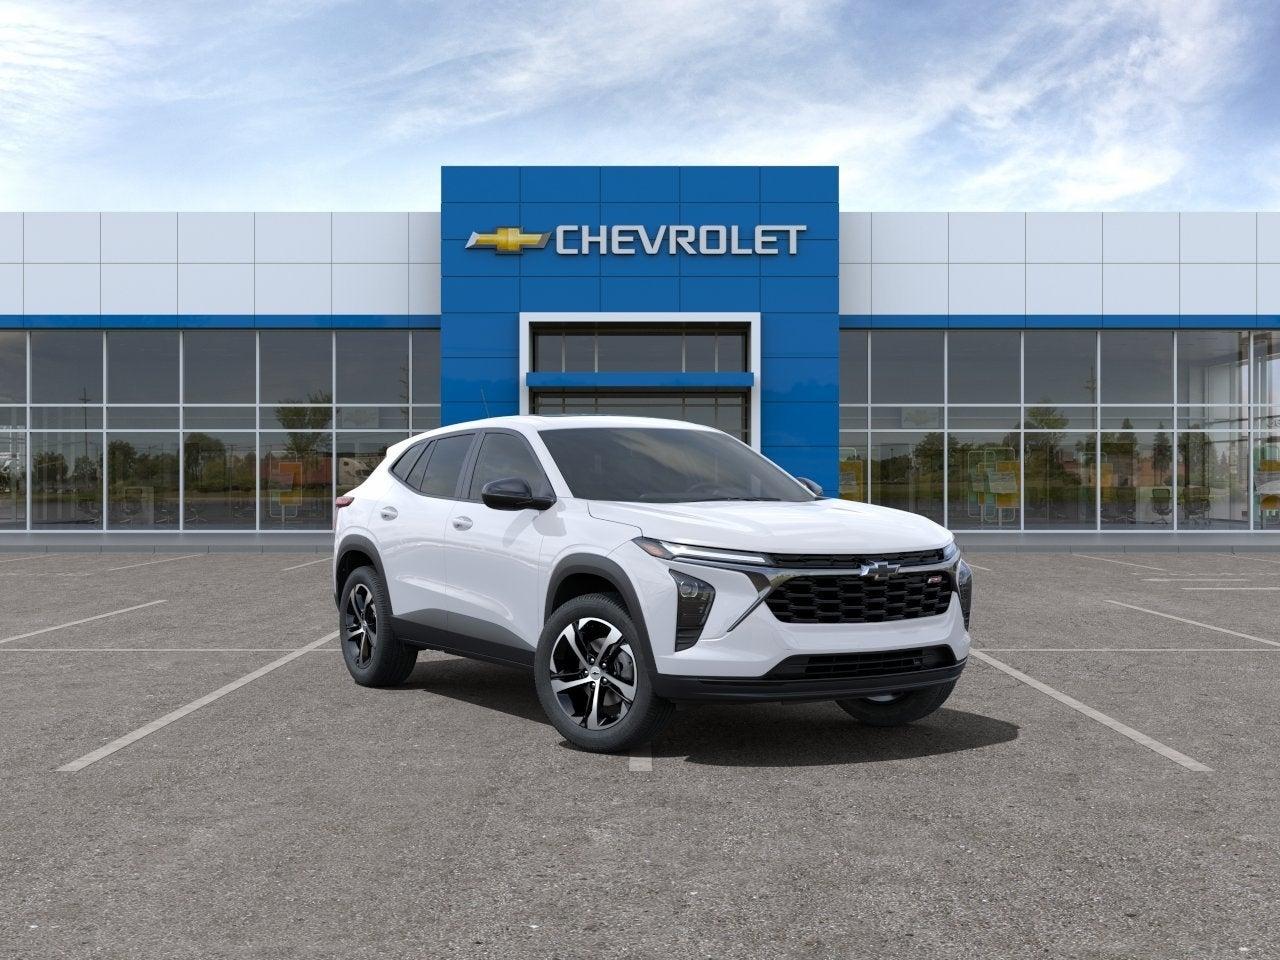 2025 Chevrolet Trax Photo in Wooster, OH 44691